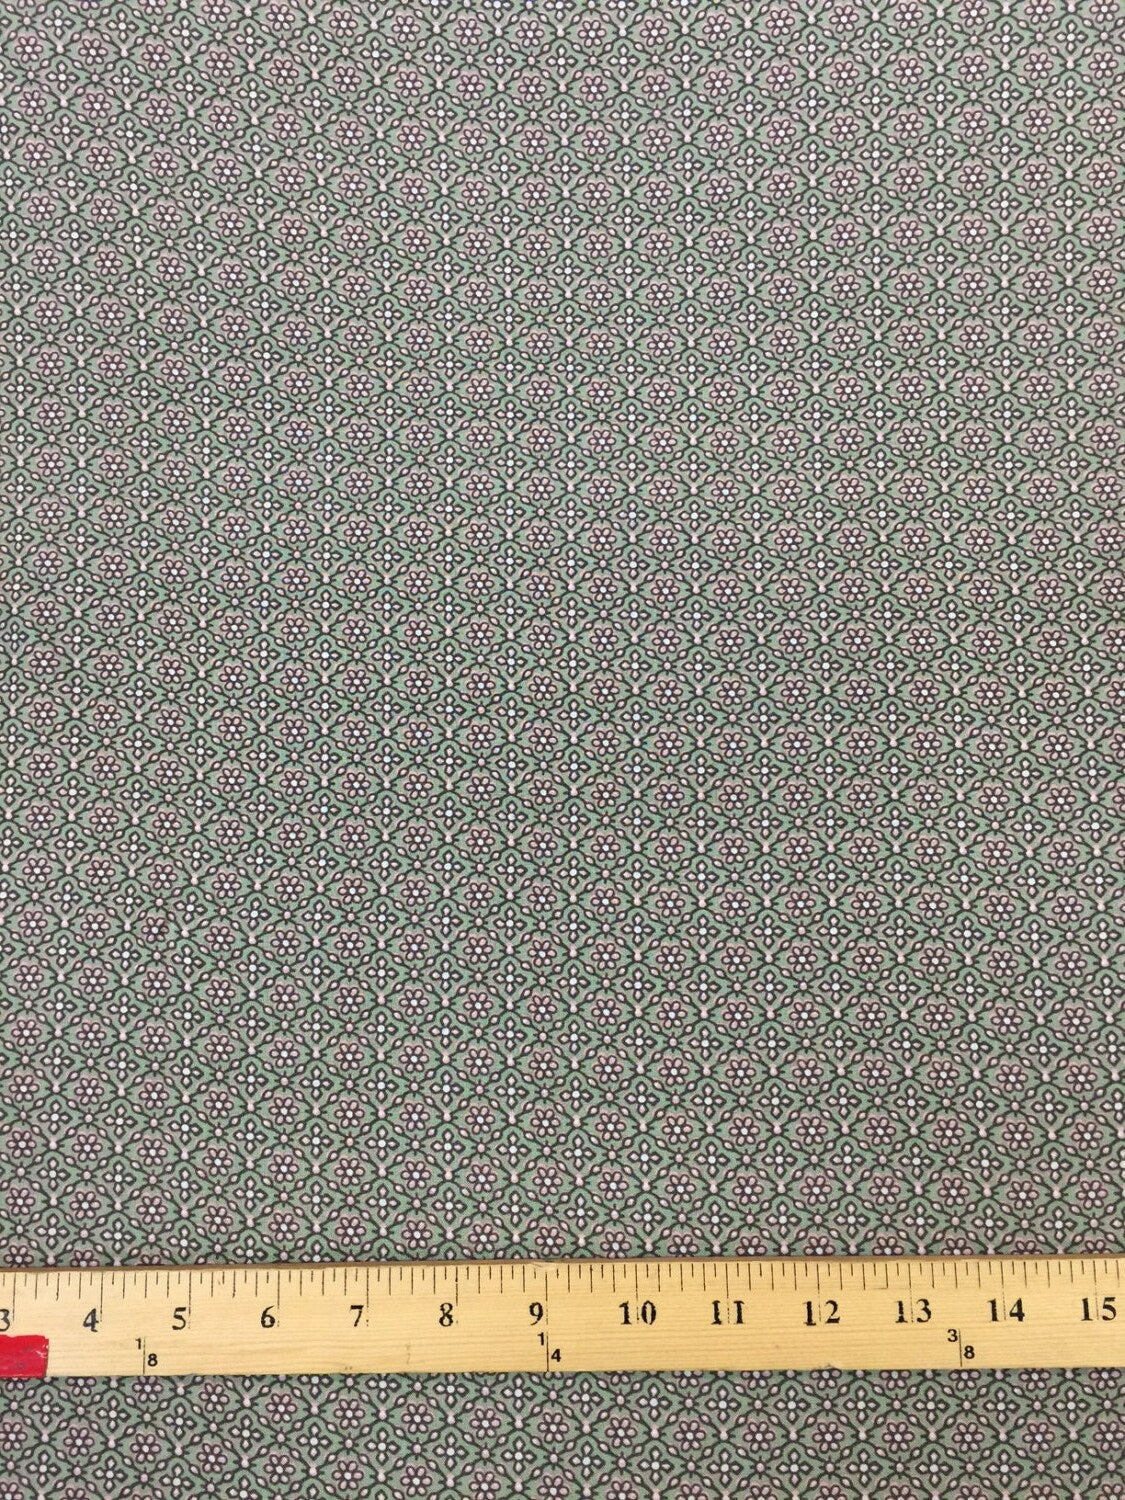 Rayon challis Light green background w small light pink flowers 58" / 60" wide fabric sold by the yard organic soft flowy fabric kids dress